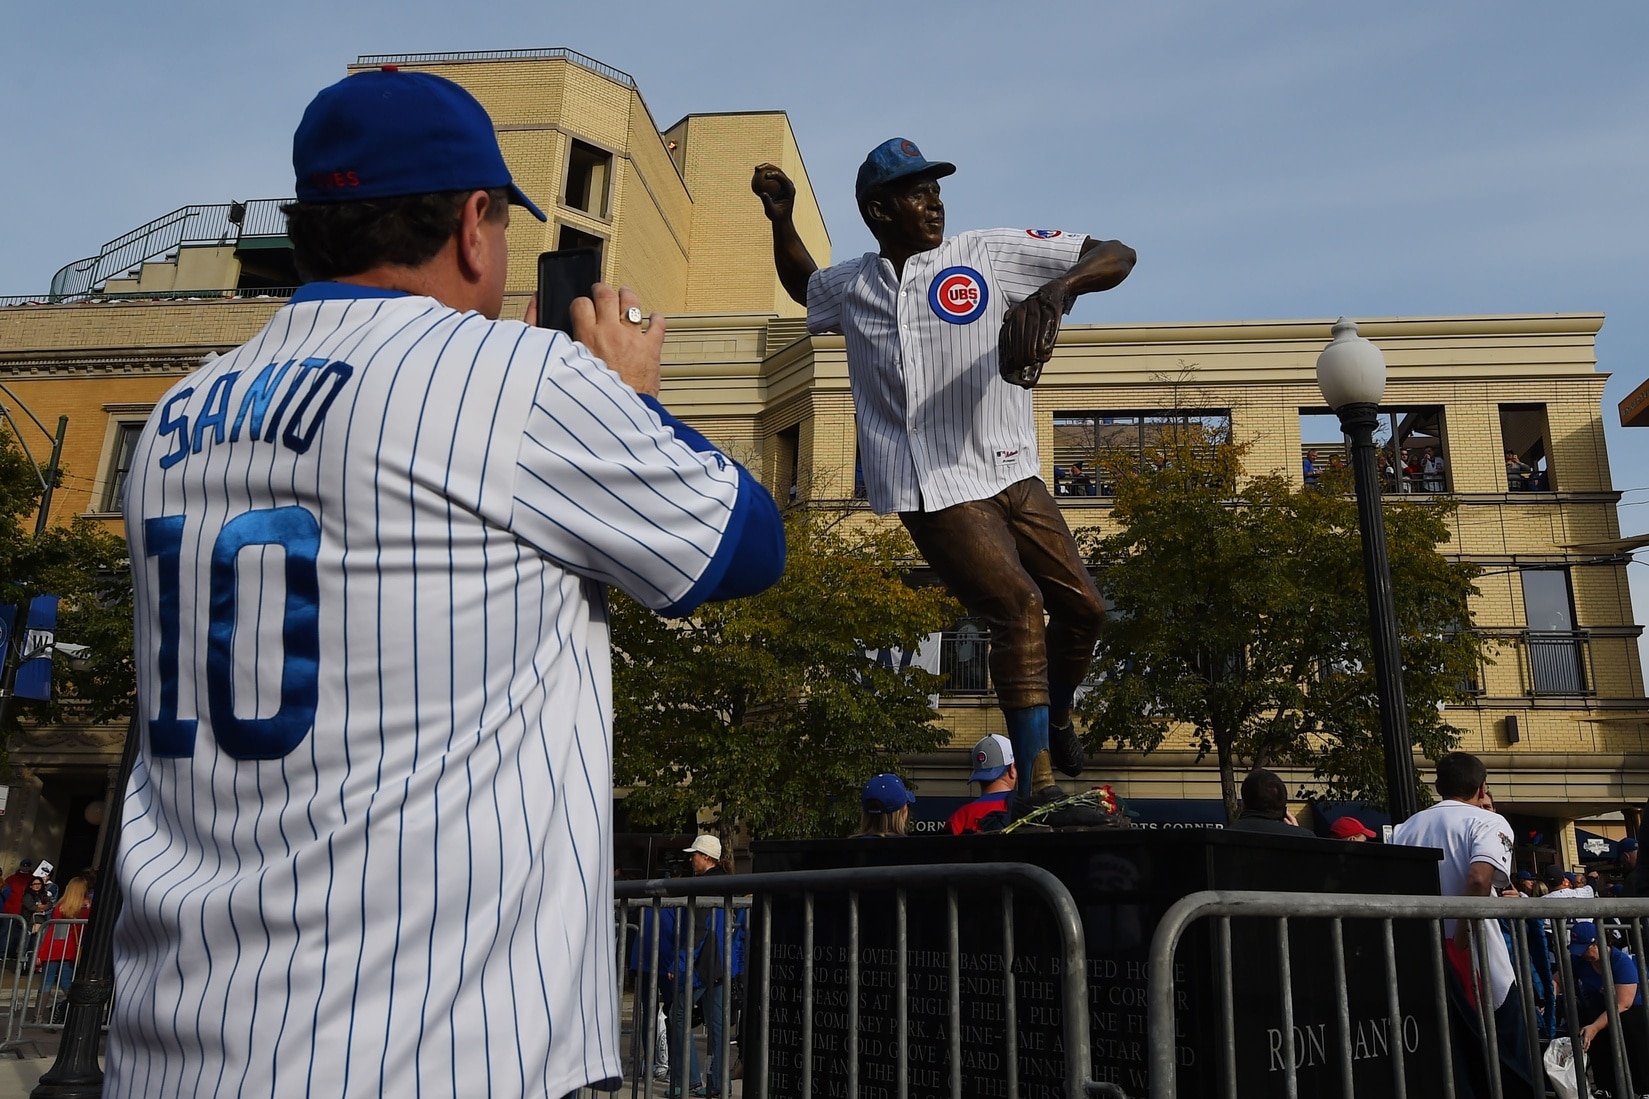 A statue of former Chicago Cubs baseball player Billy Williams